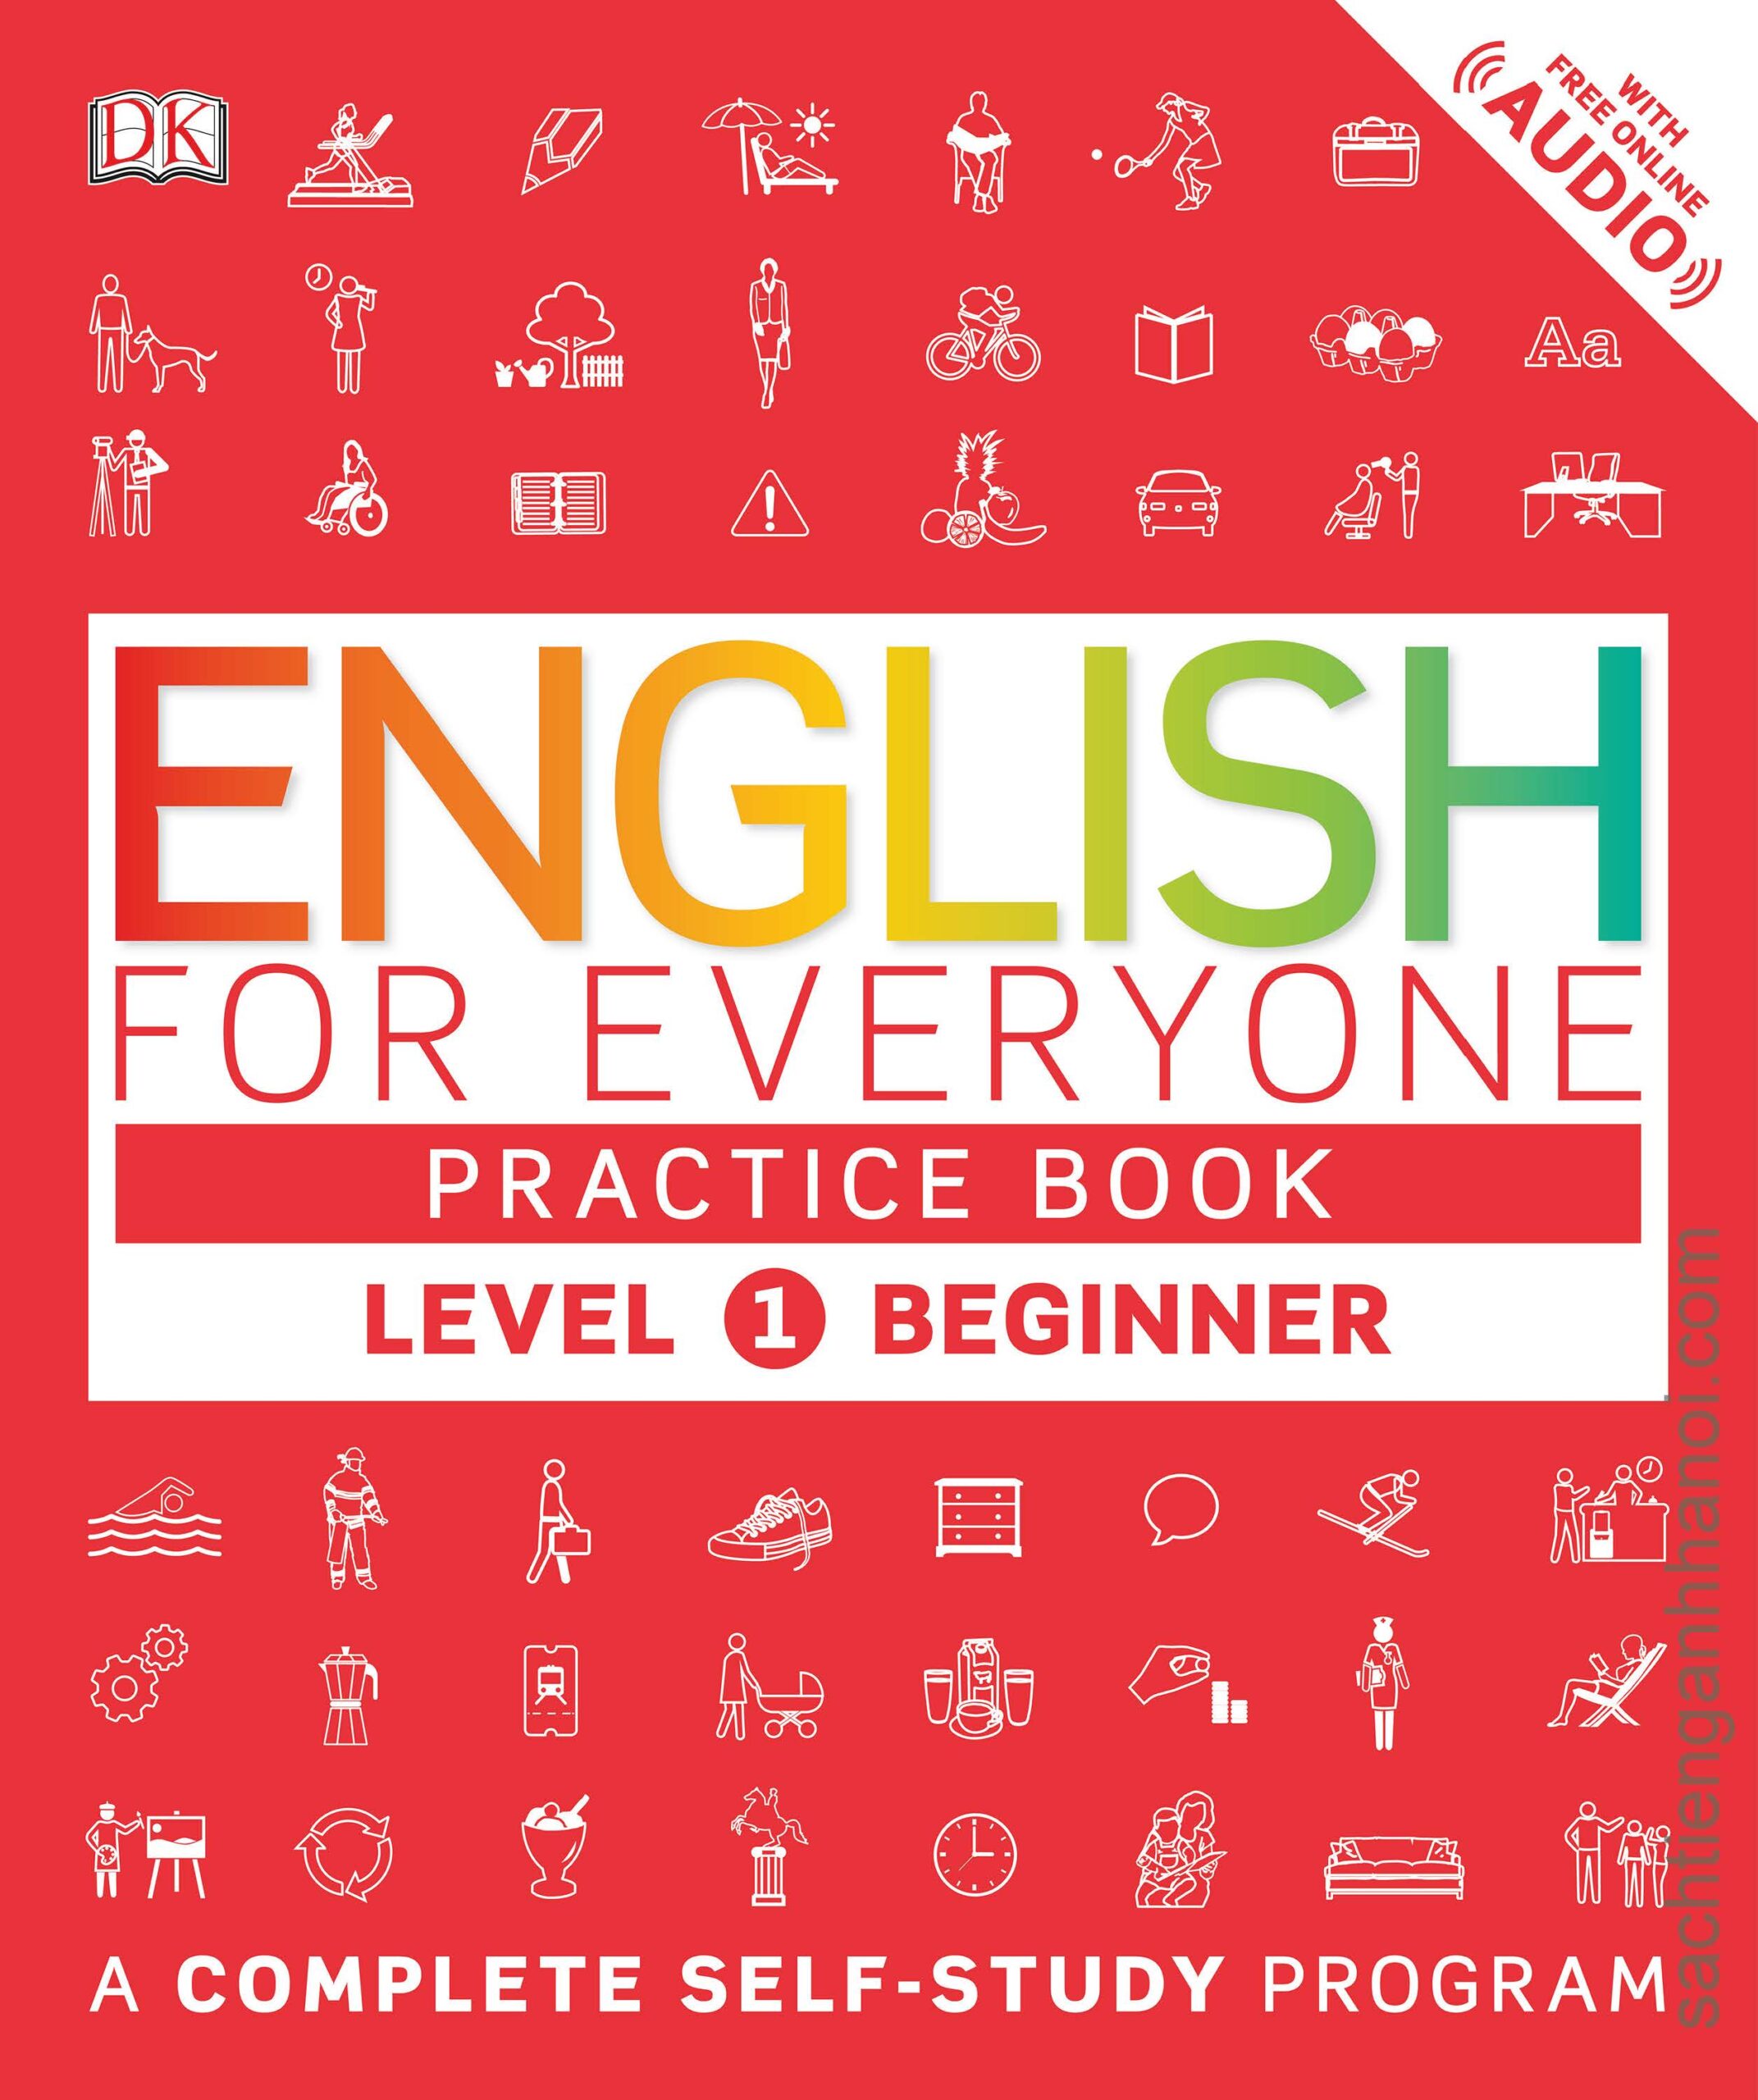 [Audio] DK English For Everyone Level 1 Beginner Practice Book - SÁCH